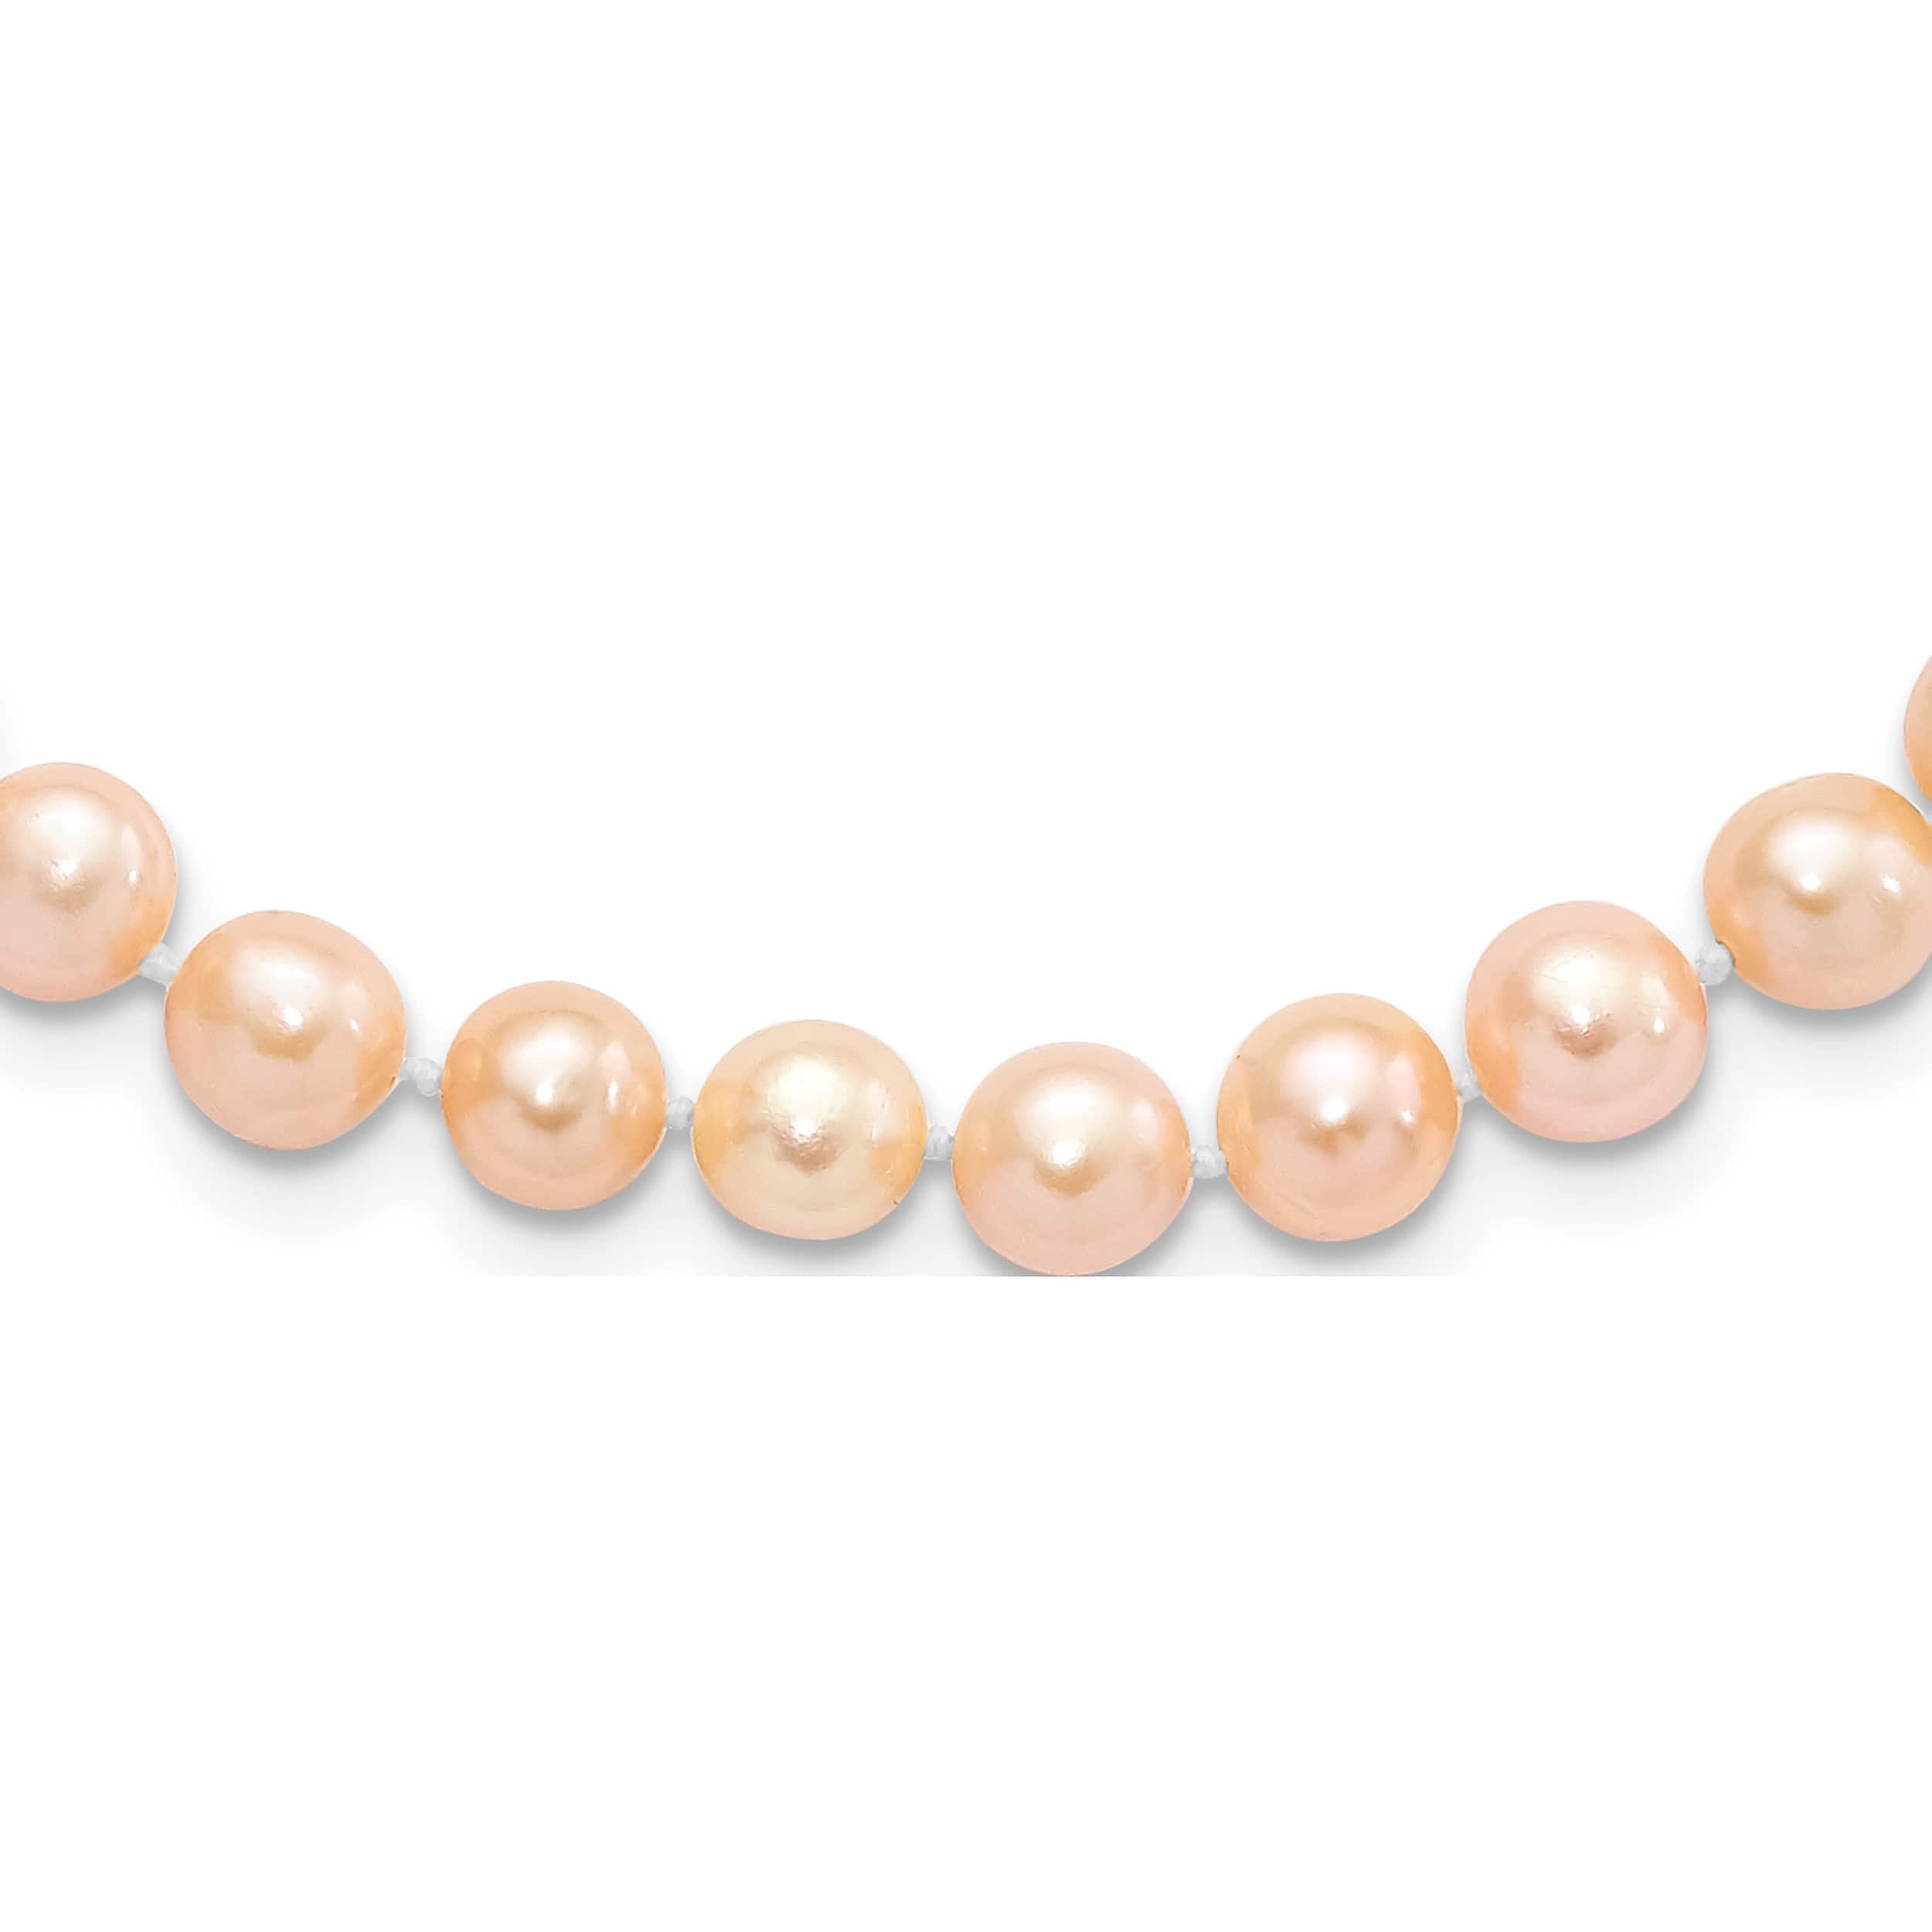 Sterling Silver Rhod-Plated 6-7mm Pink FWC Simulated Pearl Necklace Chain